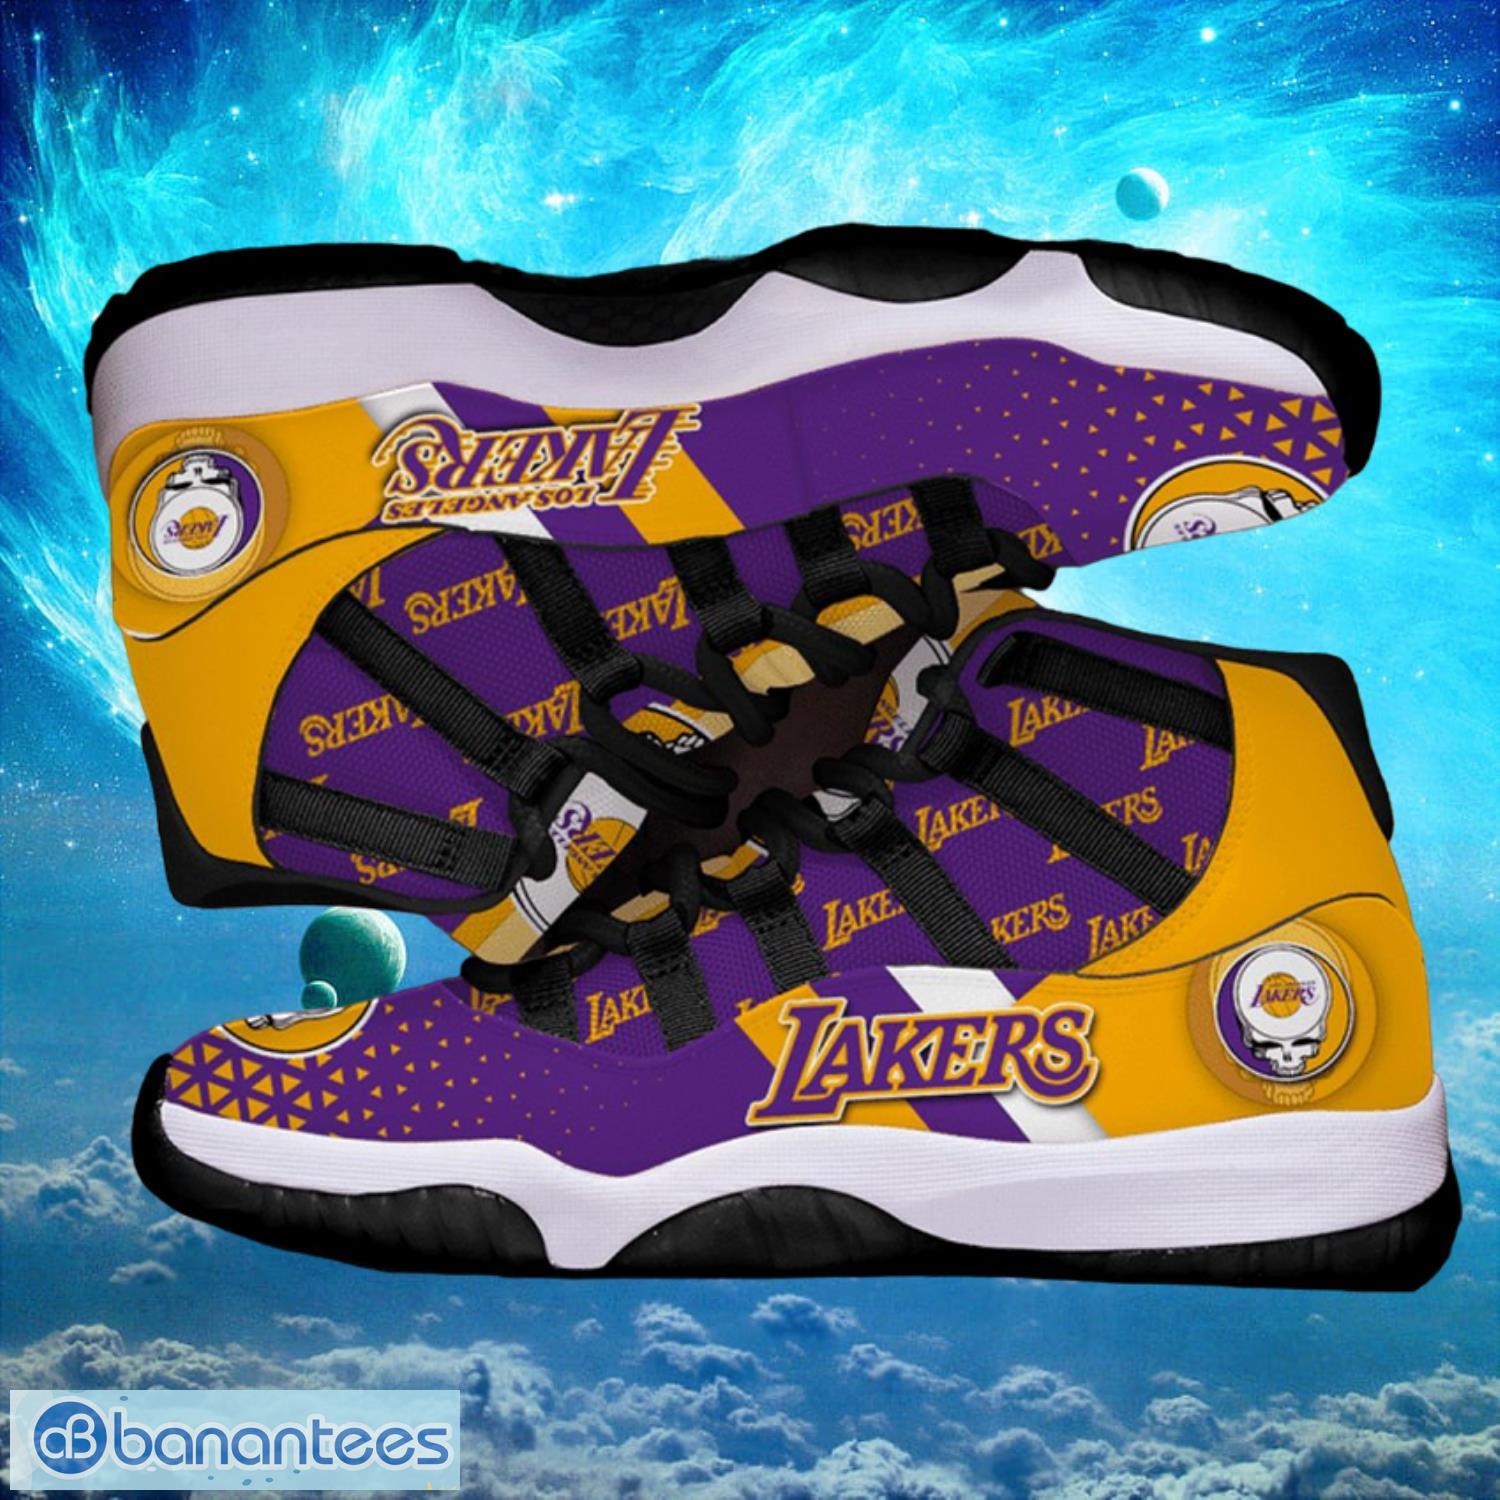 Los Angeles Lakers NBA Air Jordan 11 Sneakers Shoes Gift For Fans Product Photo 1